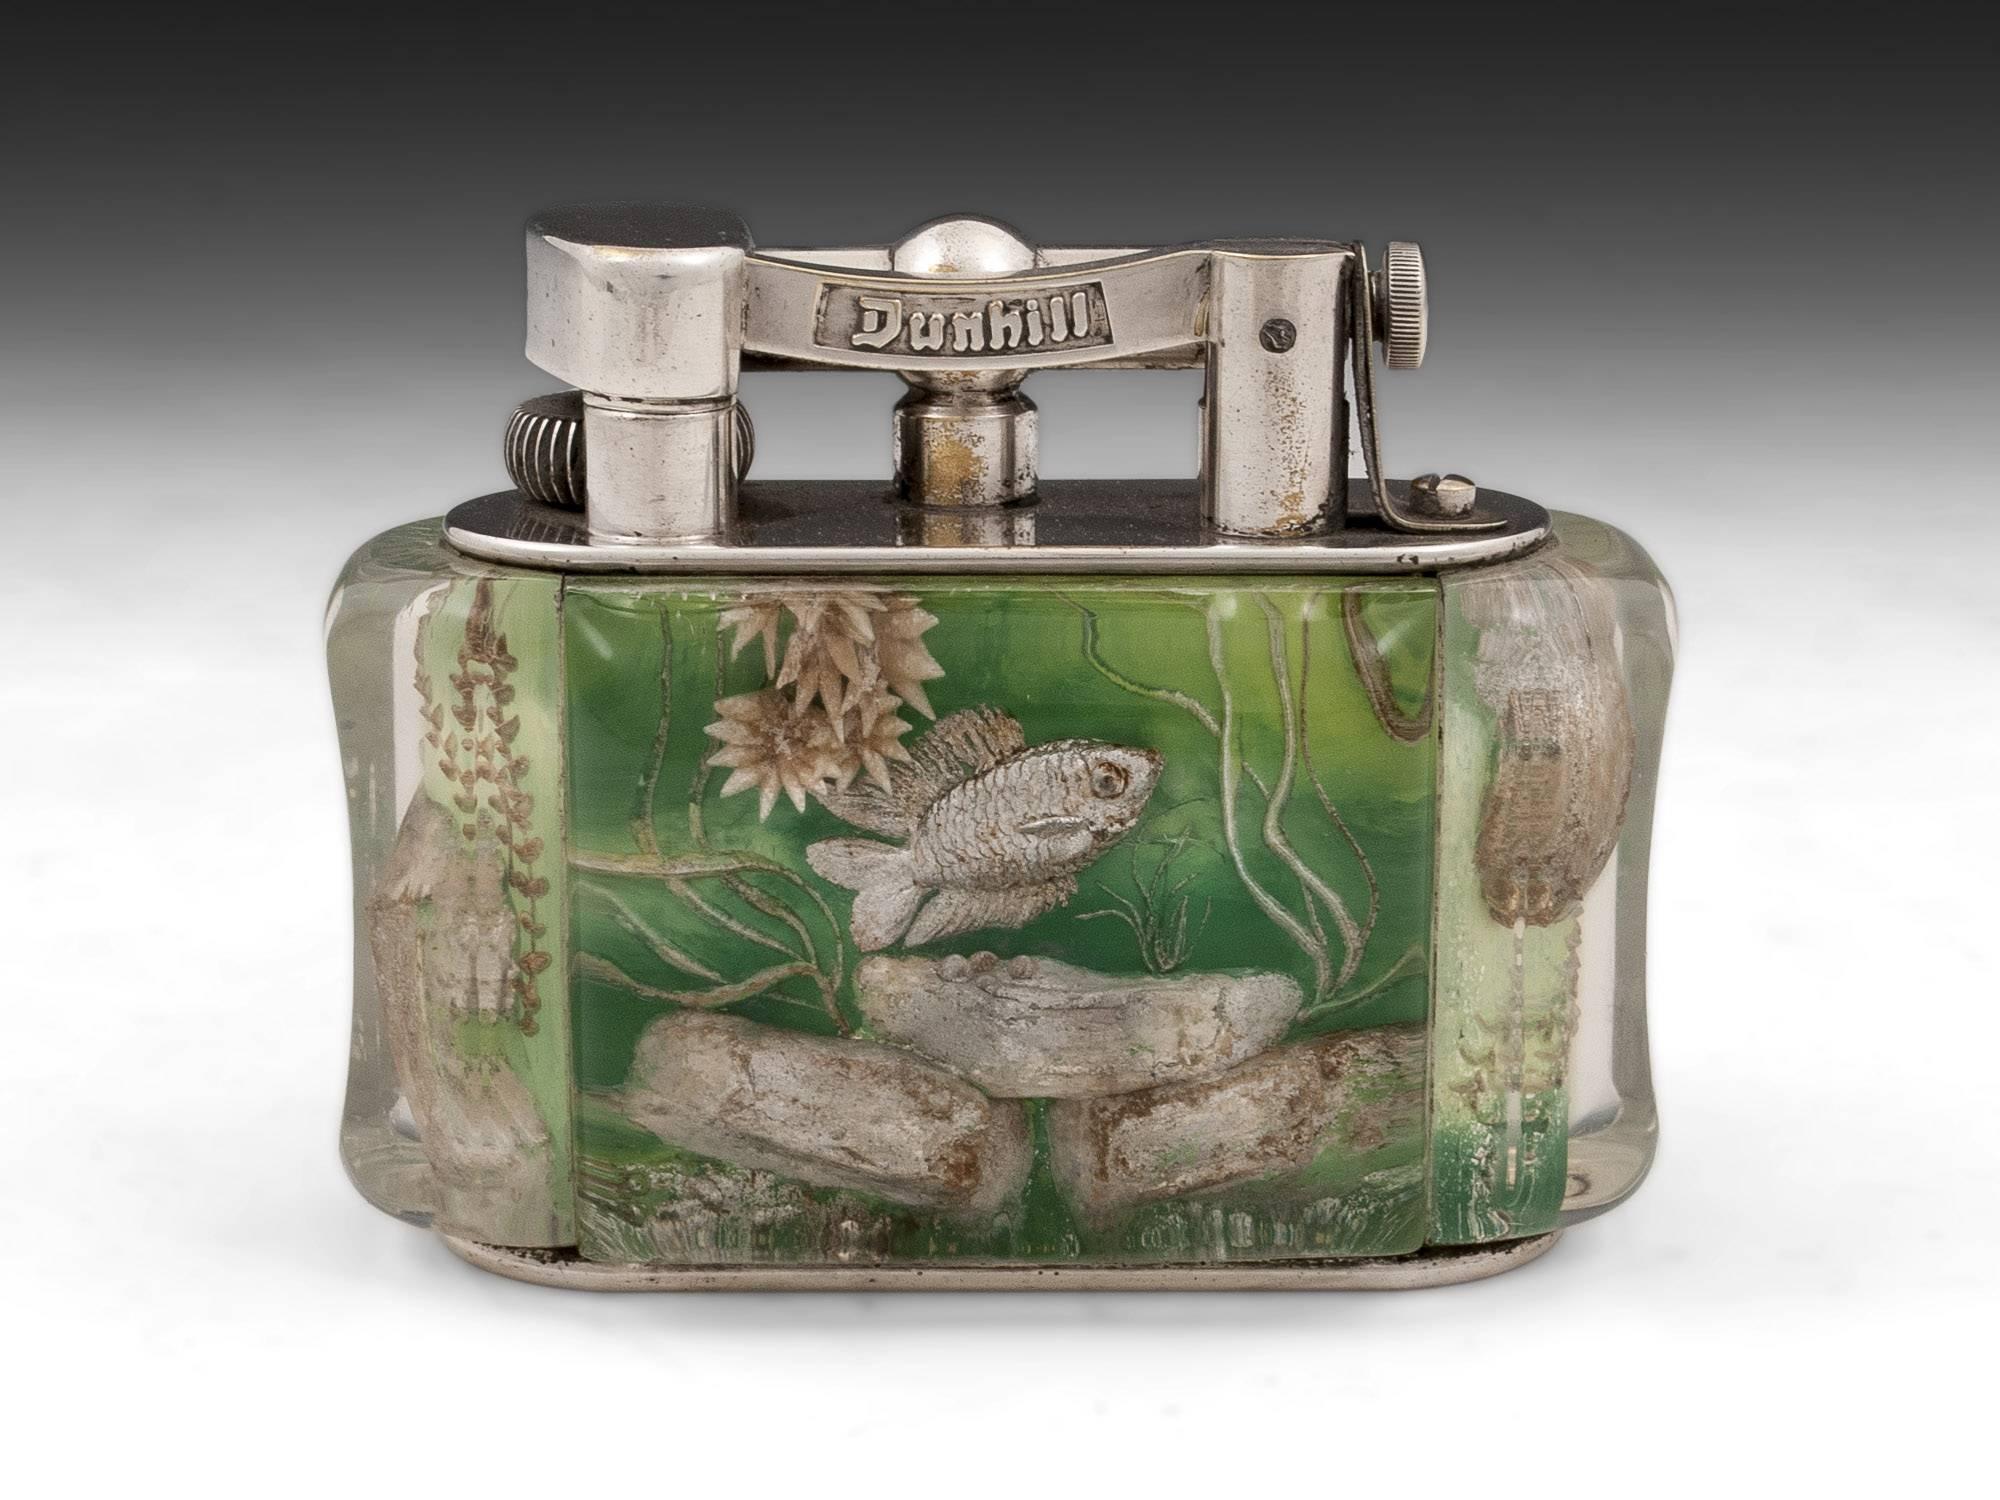 Aquarium table cigarette Lighter by Alfred Dunhill. 

This 